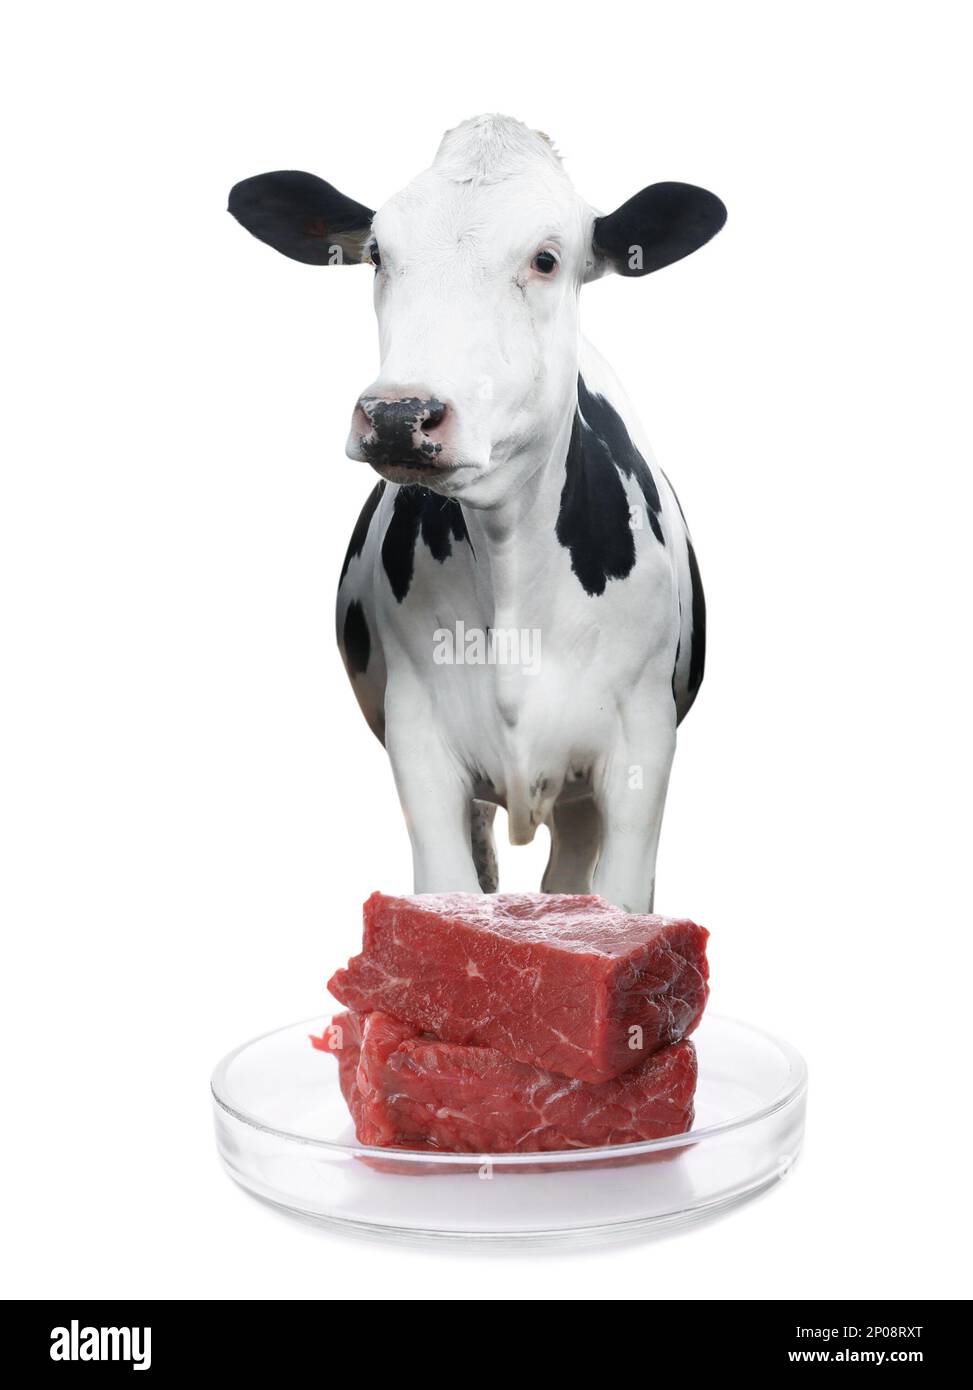 Lab grown beef in Petri dish and cow on white background. Cultured meat concept Stock Photo